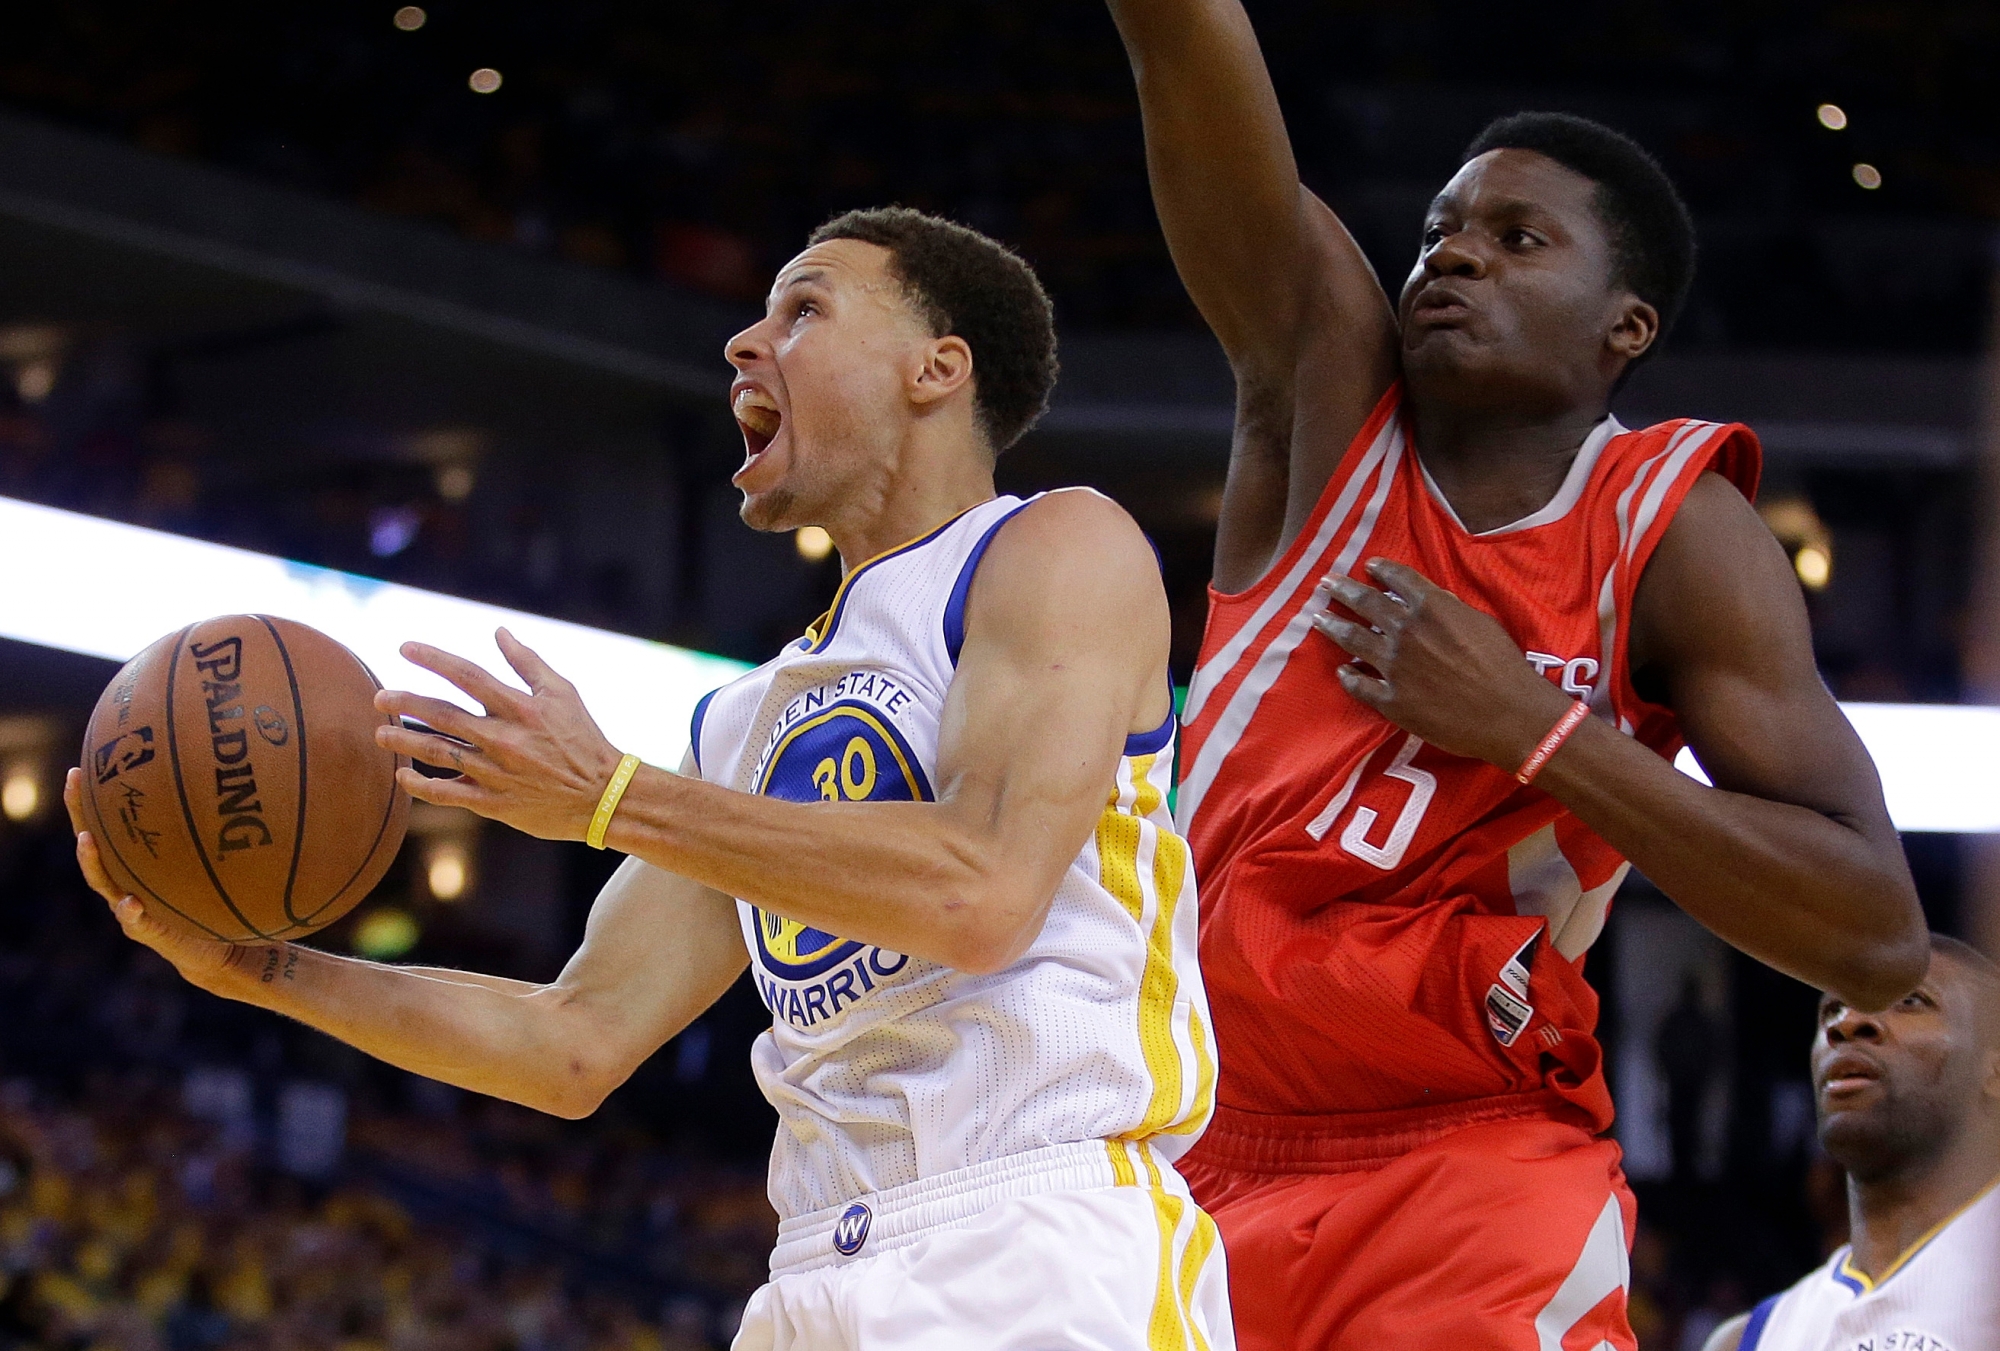 Golden State Warriors guard Stephen Curry (30) shoots against Houston Rockets center Clint Capela (15) during the second half of Game 2 of the NBA basketball Western Conference finals in Oakland, Calif., Thursday, May 21, 2015. (AP Photo/Rick Bowmer)d ROCKETS WARRIORS BASKETBALL